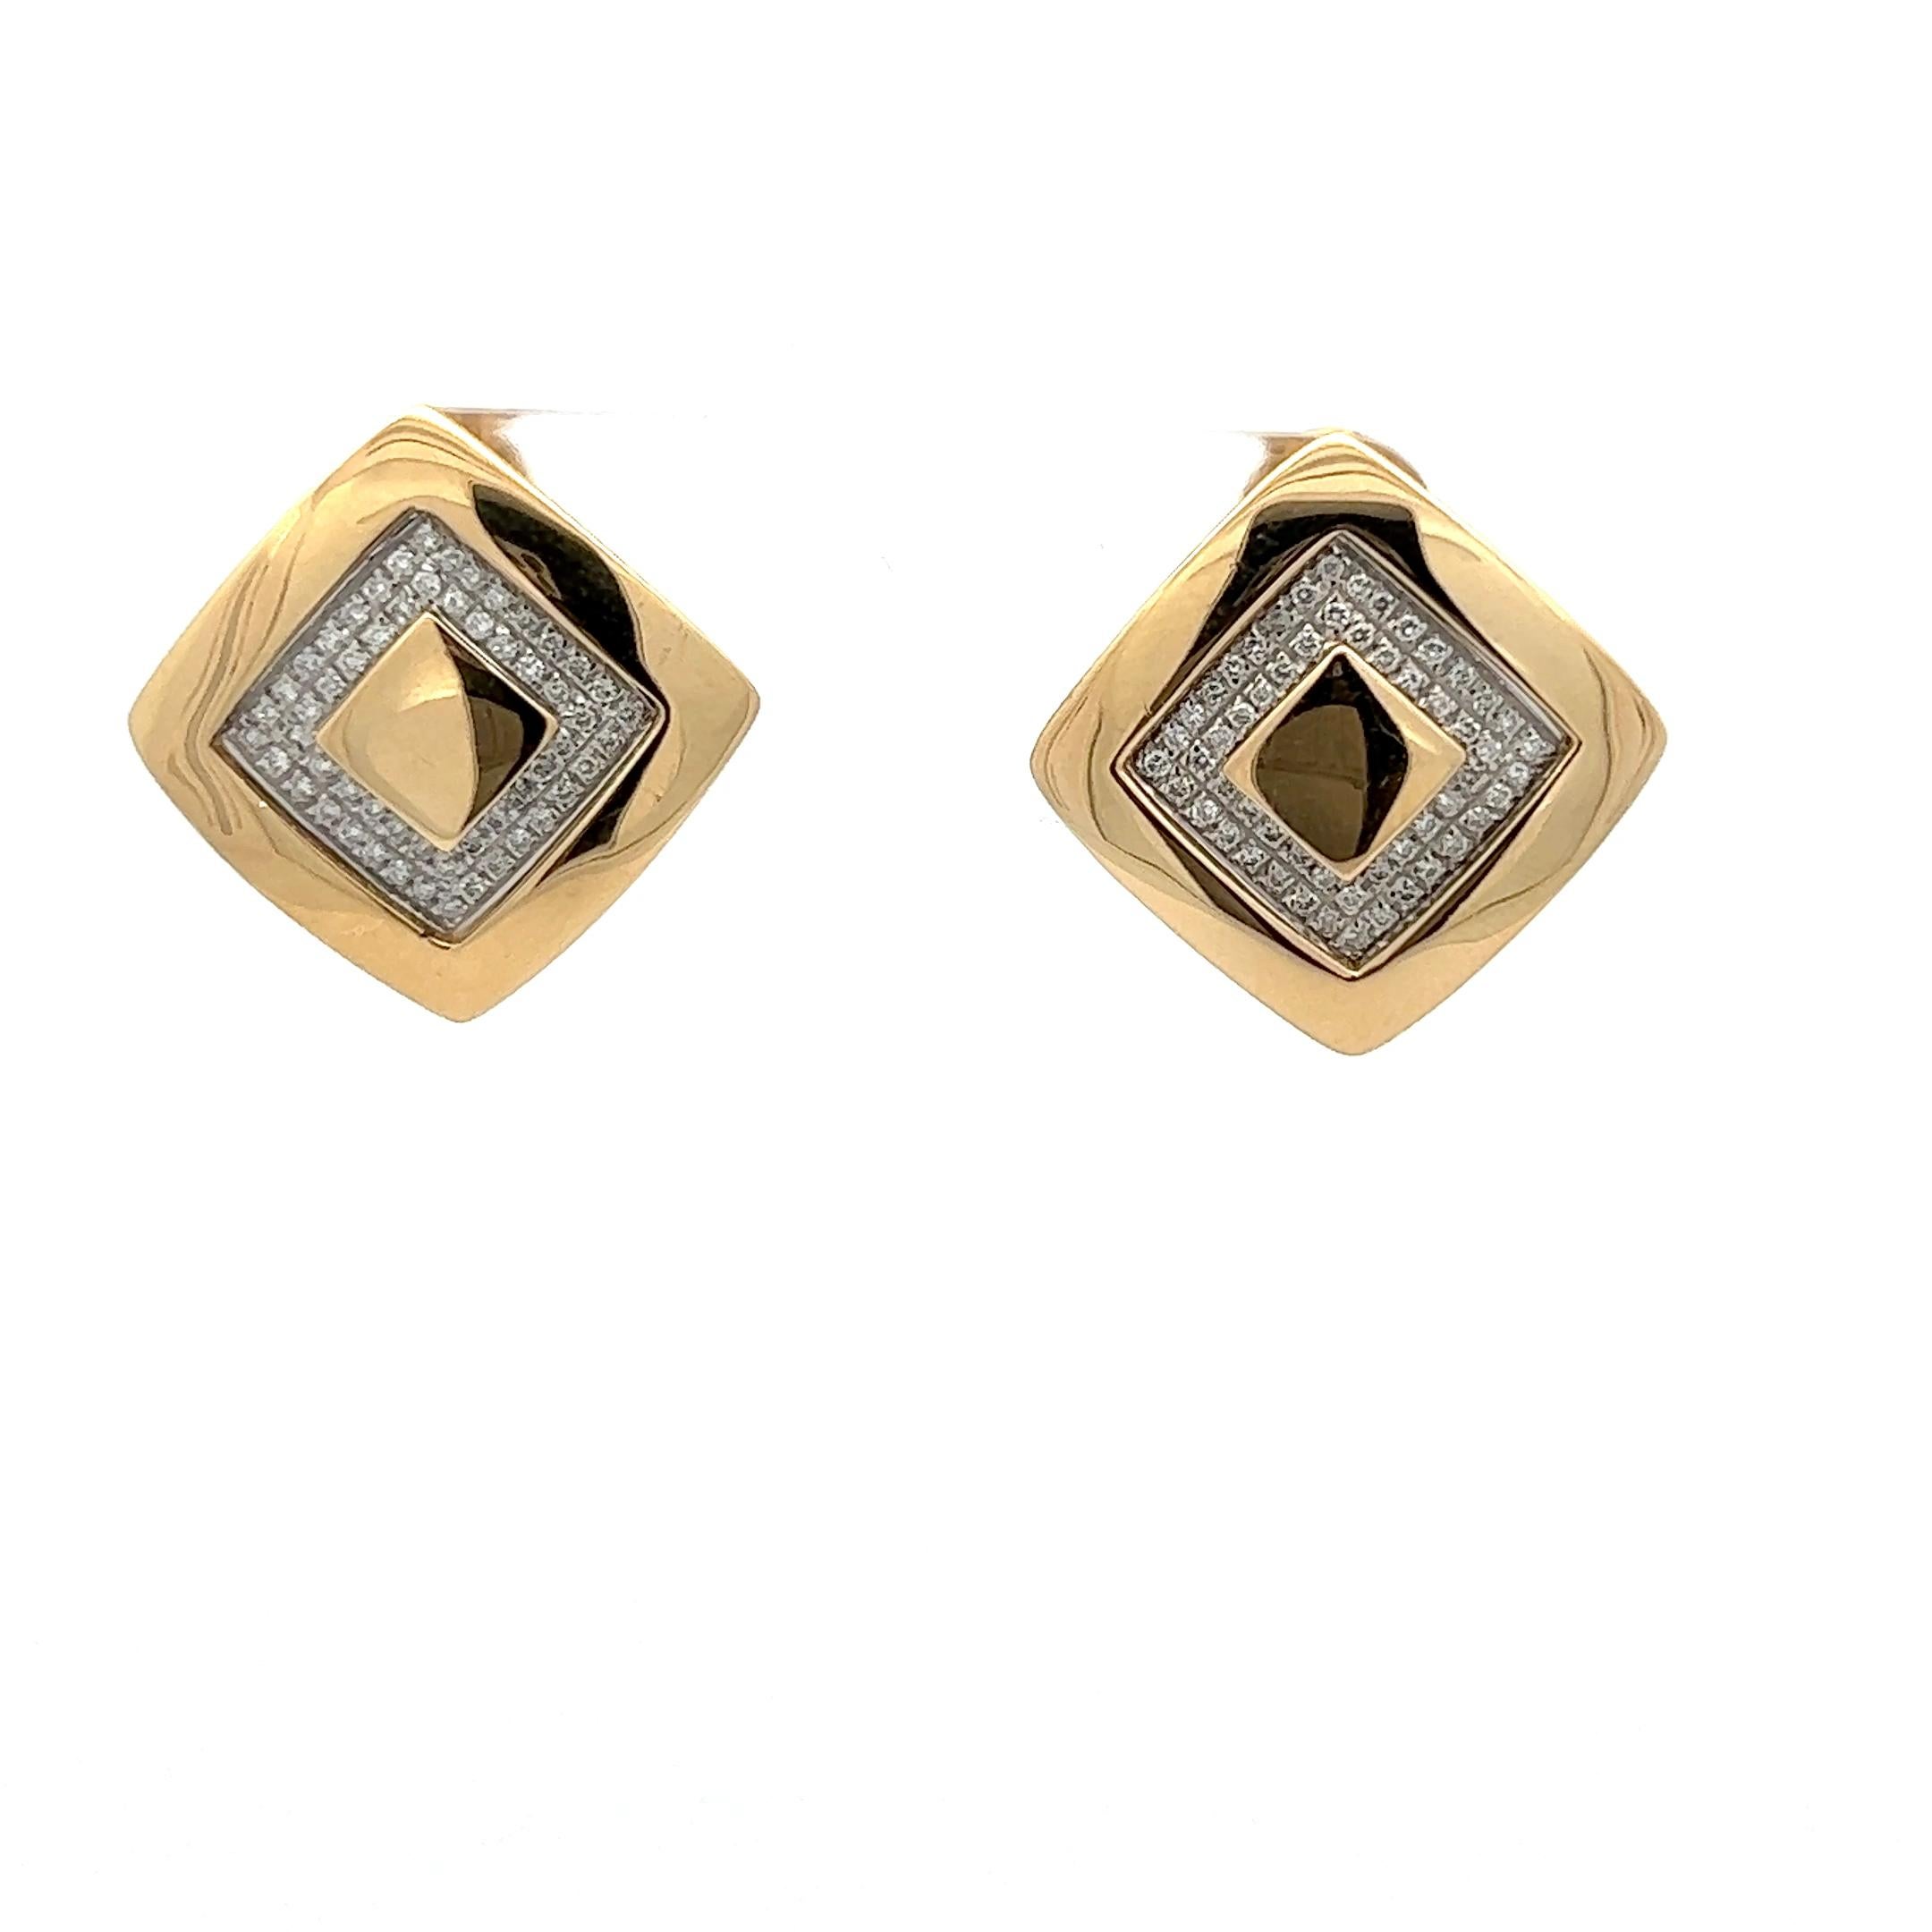 Single Cut A pair of 18k yellow gold and diamond earrings by Versace. For Sale